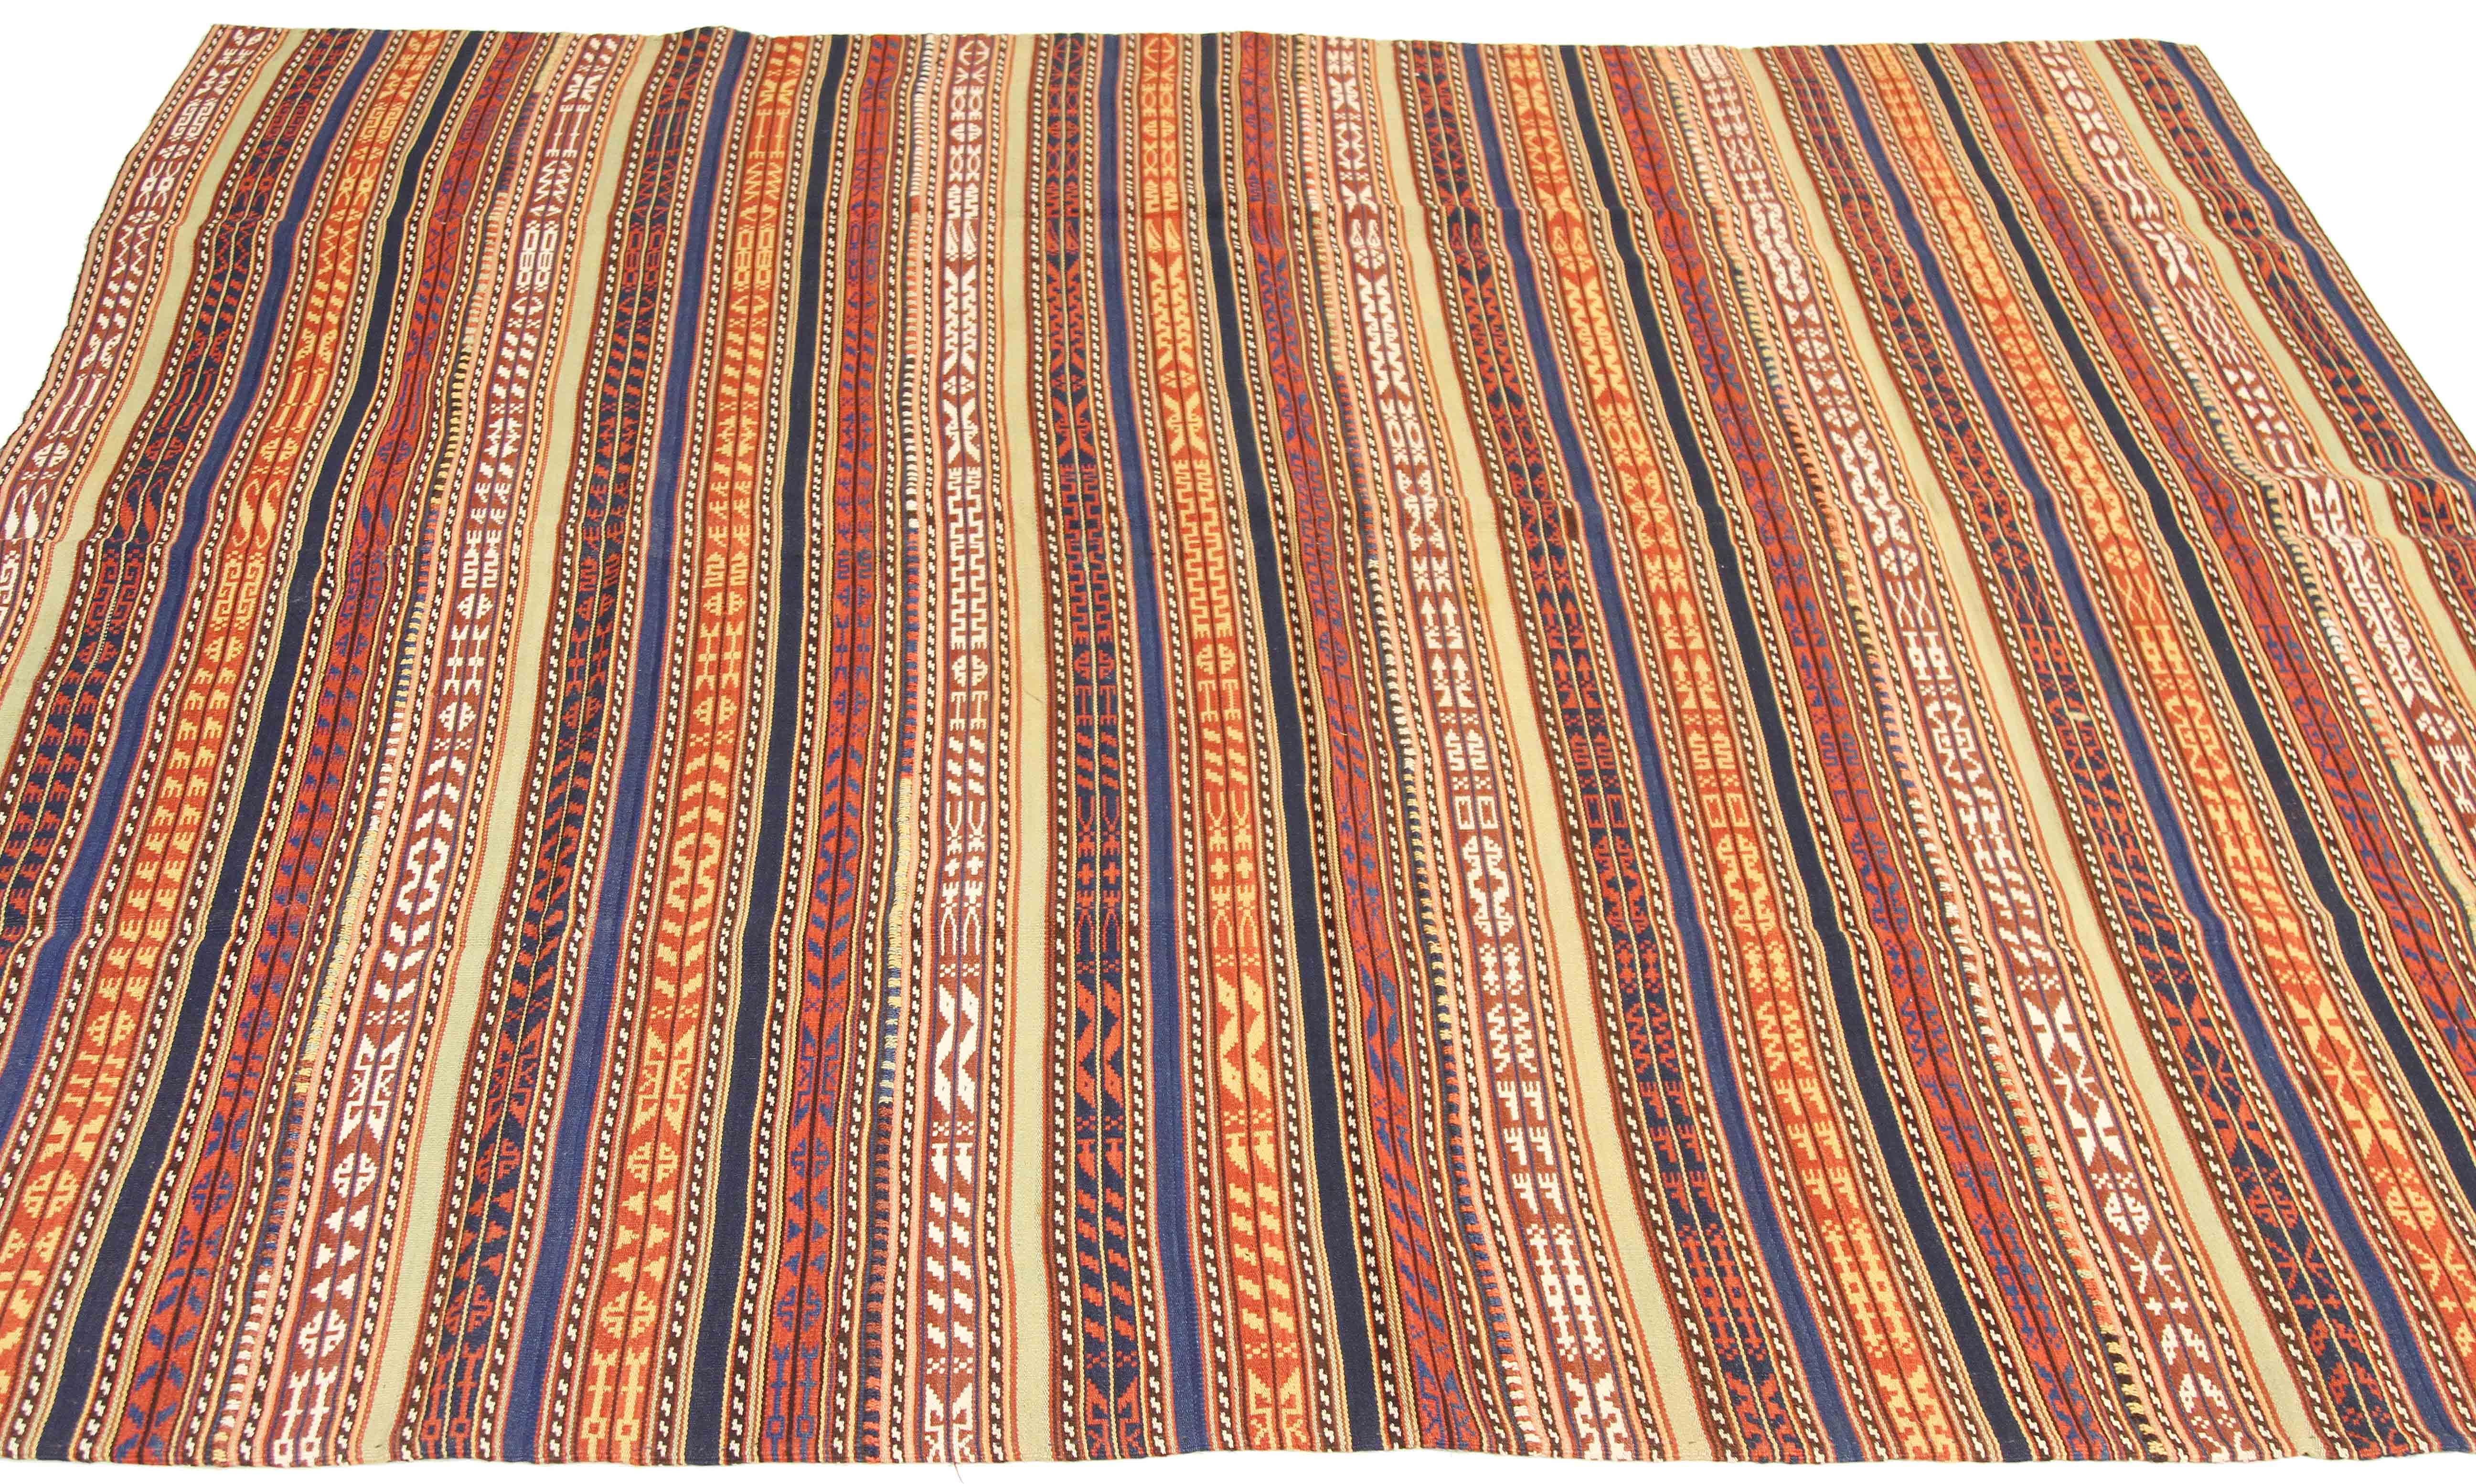 Antique Persian rug handwoven from the finest sheep’s wool and colored with all-natural vegetable dyes that are safe for humans and pets. It’s a traditional Jajim flat-weave design featuring red and blue tribal stripes. It’s a stunning piece to get